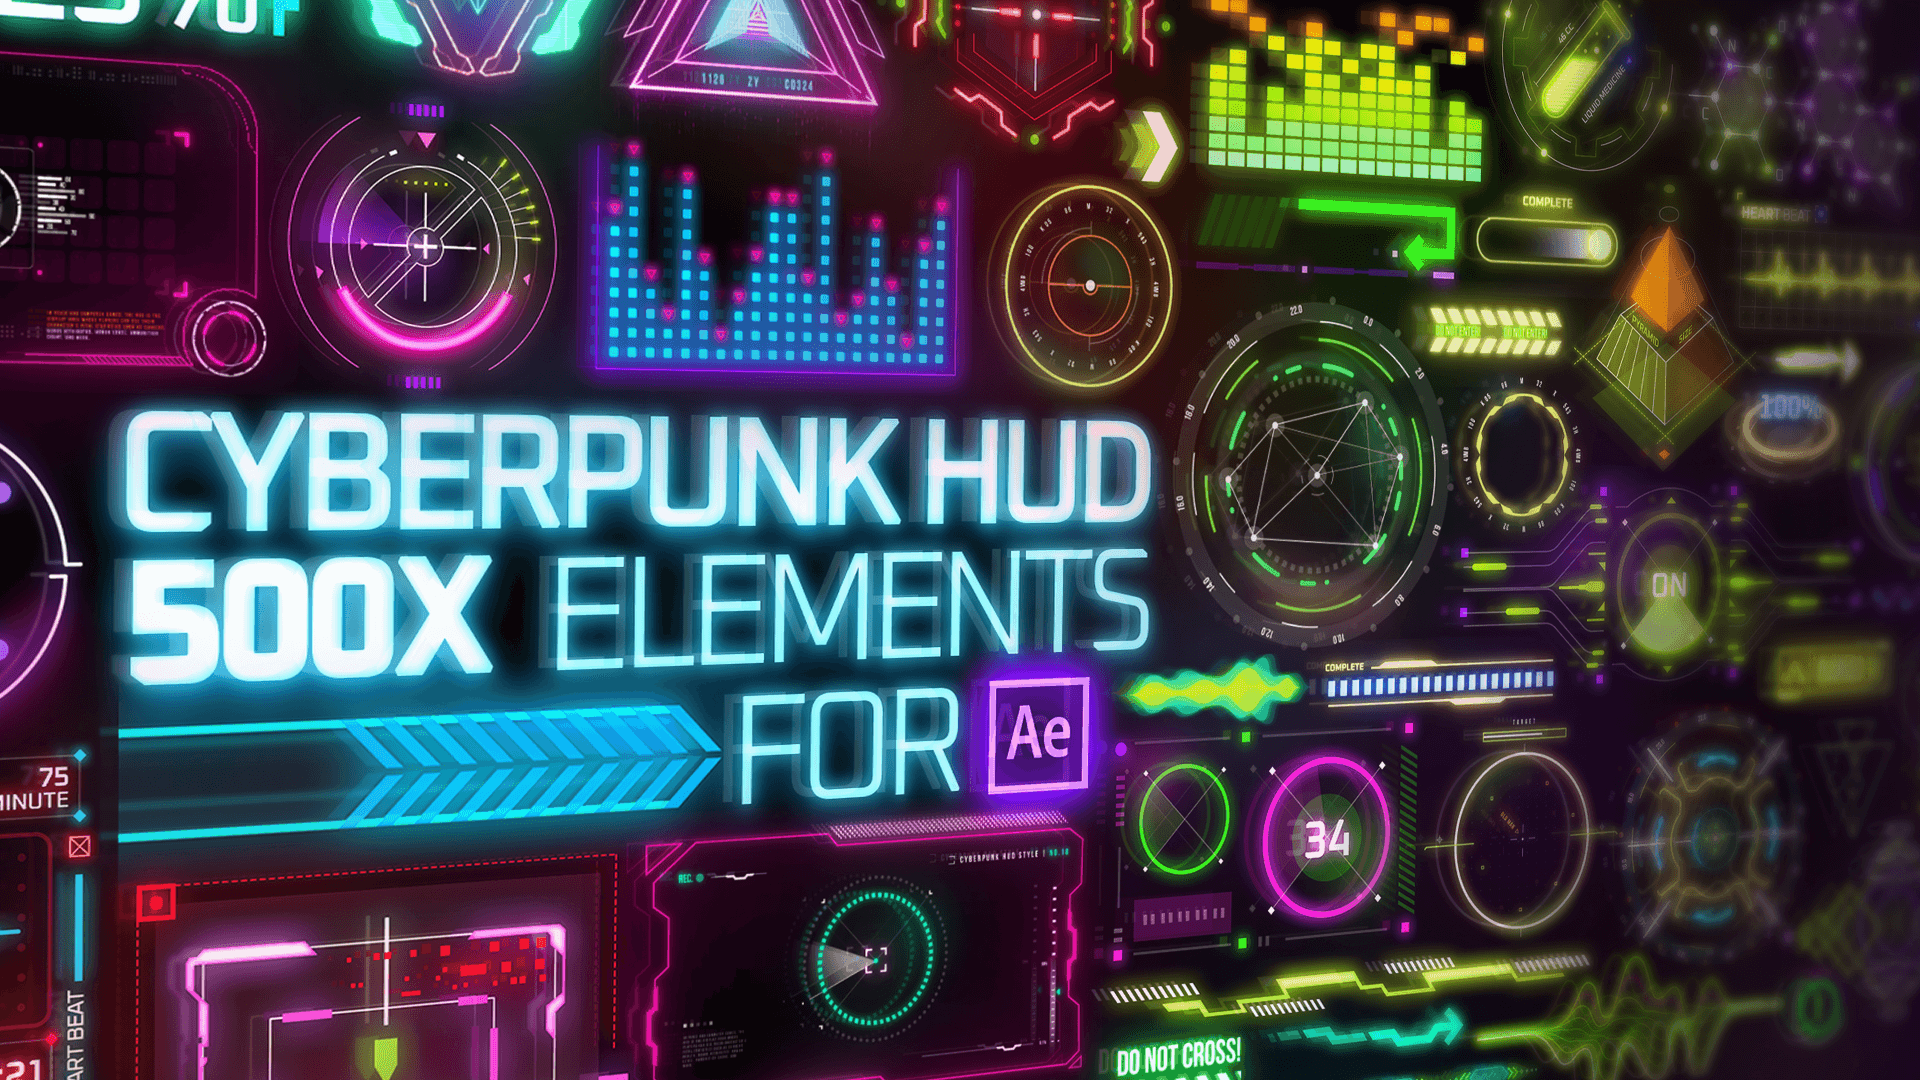 Cyberpunk hud elements for after effects torrent фото 3